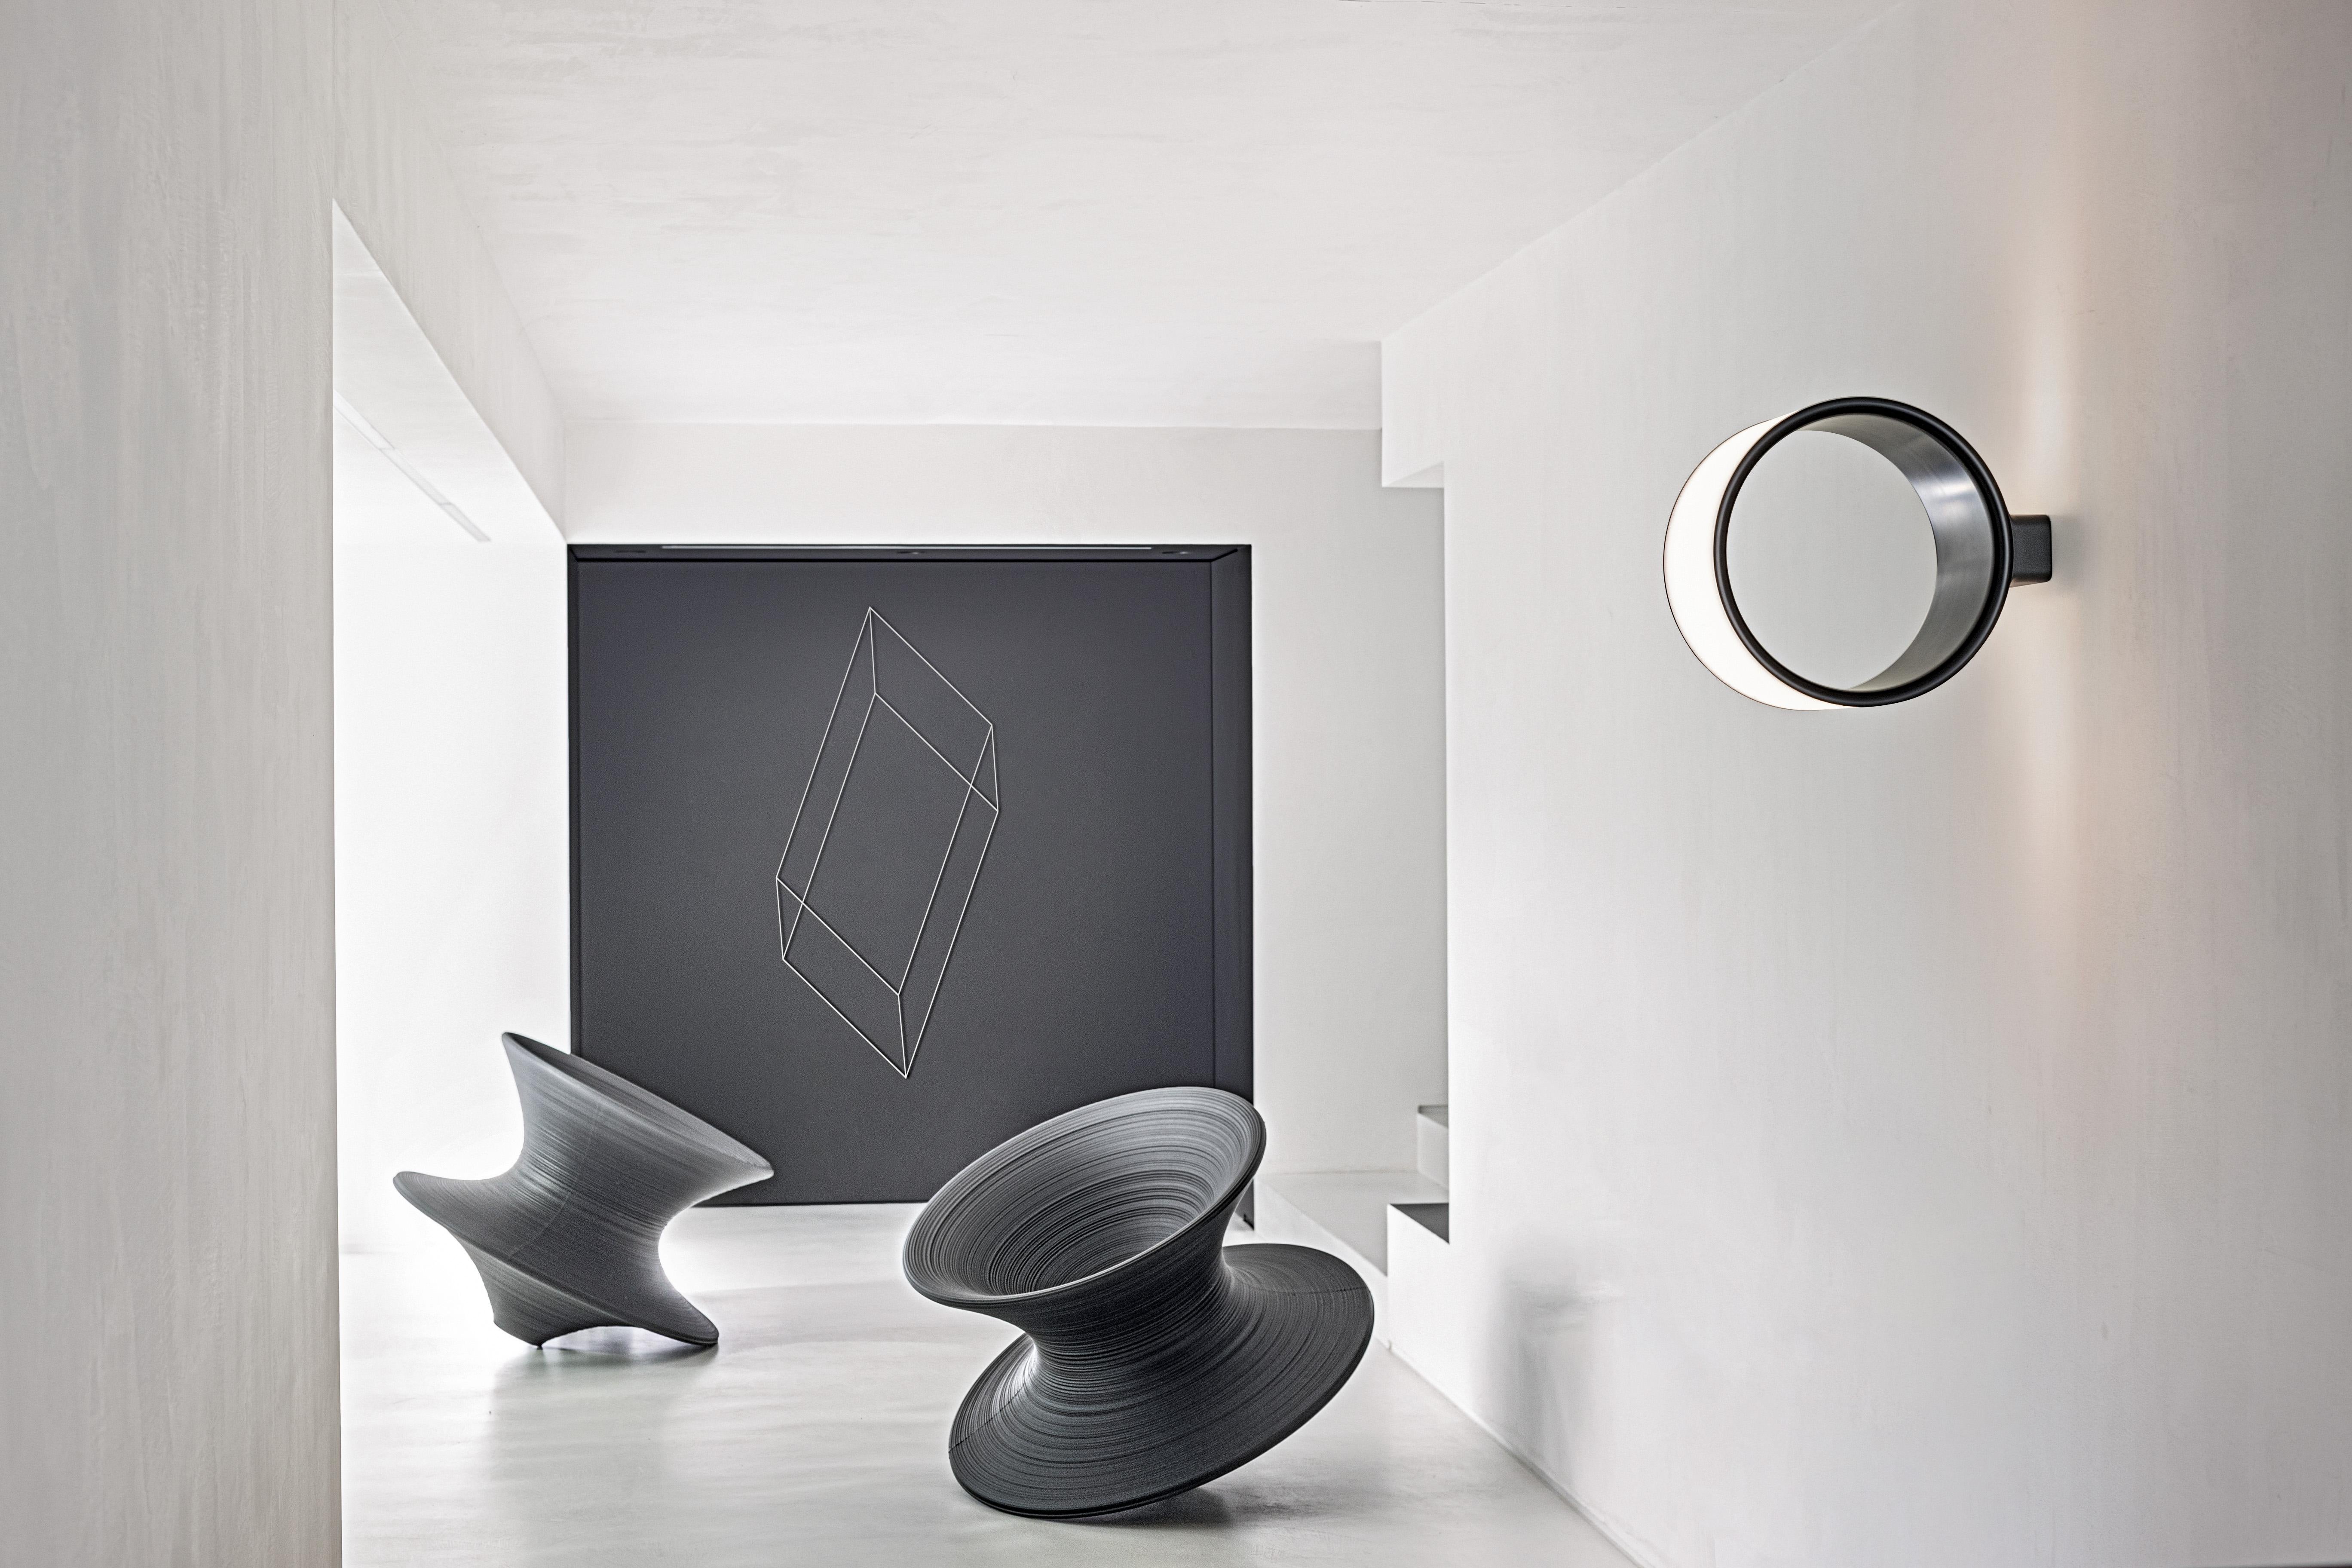 Not just a new seat, a new concept in seating and sitting: Spun. Its harmonious, dynamic and perfectly symmetric shape is reminiscent of a cotton reel, a top that spins on its axis or a vase thrown on a potter’s wheel. A captivating contemporary